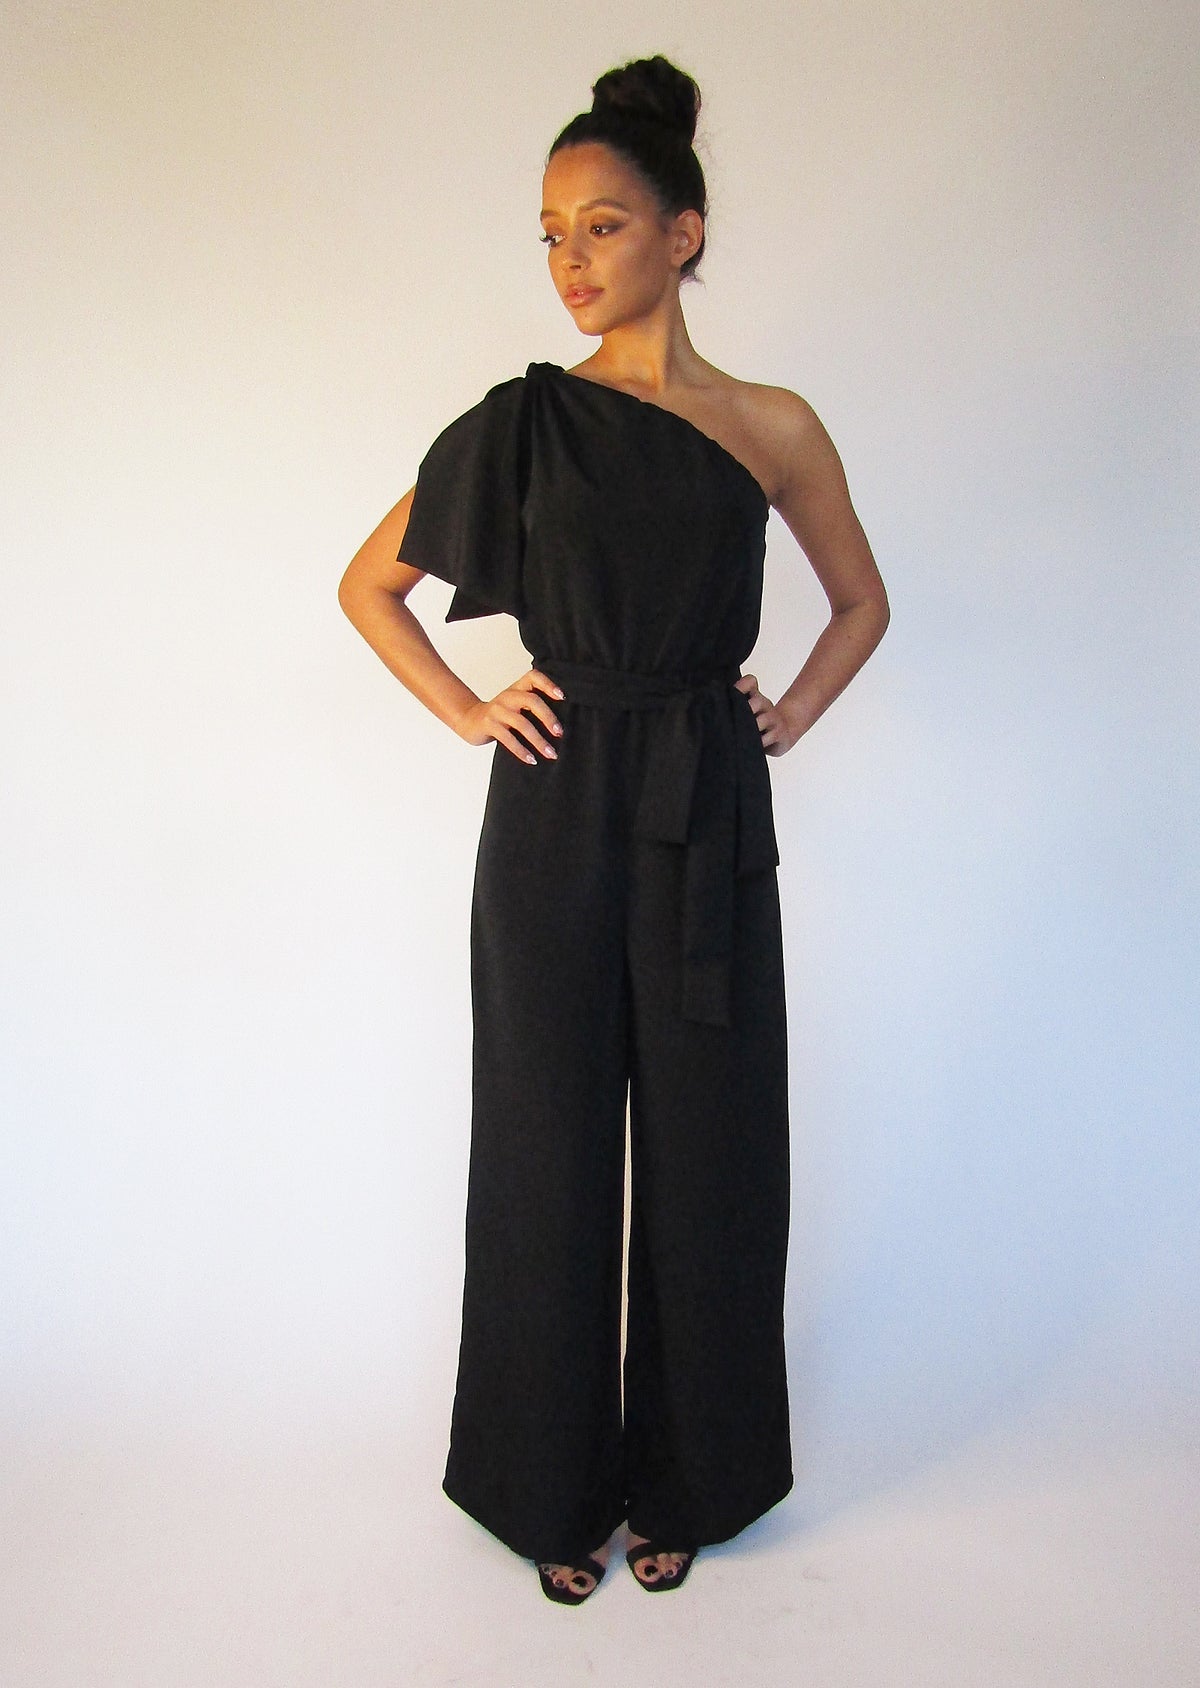 petite black  jumpsuit with wide legs and one sleeve.